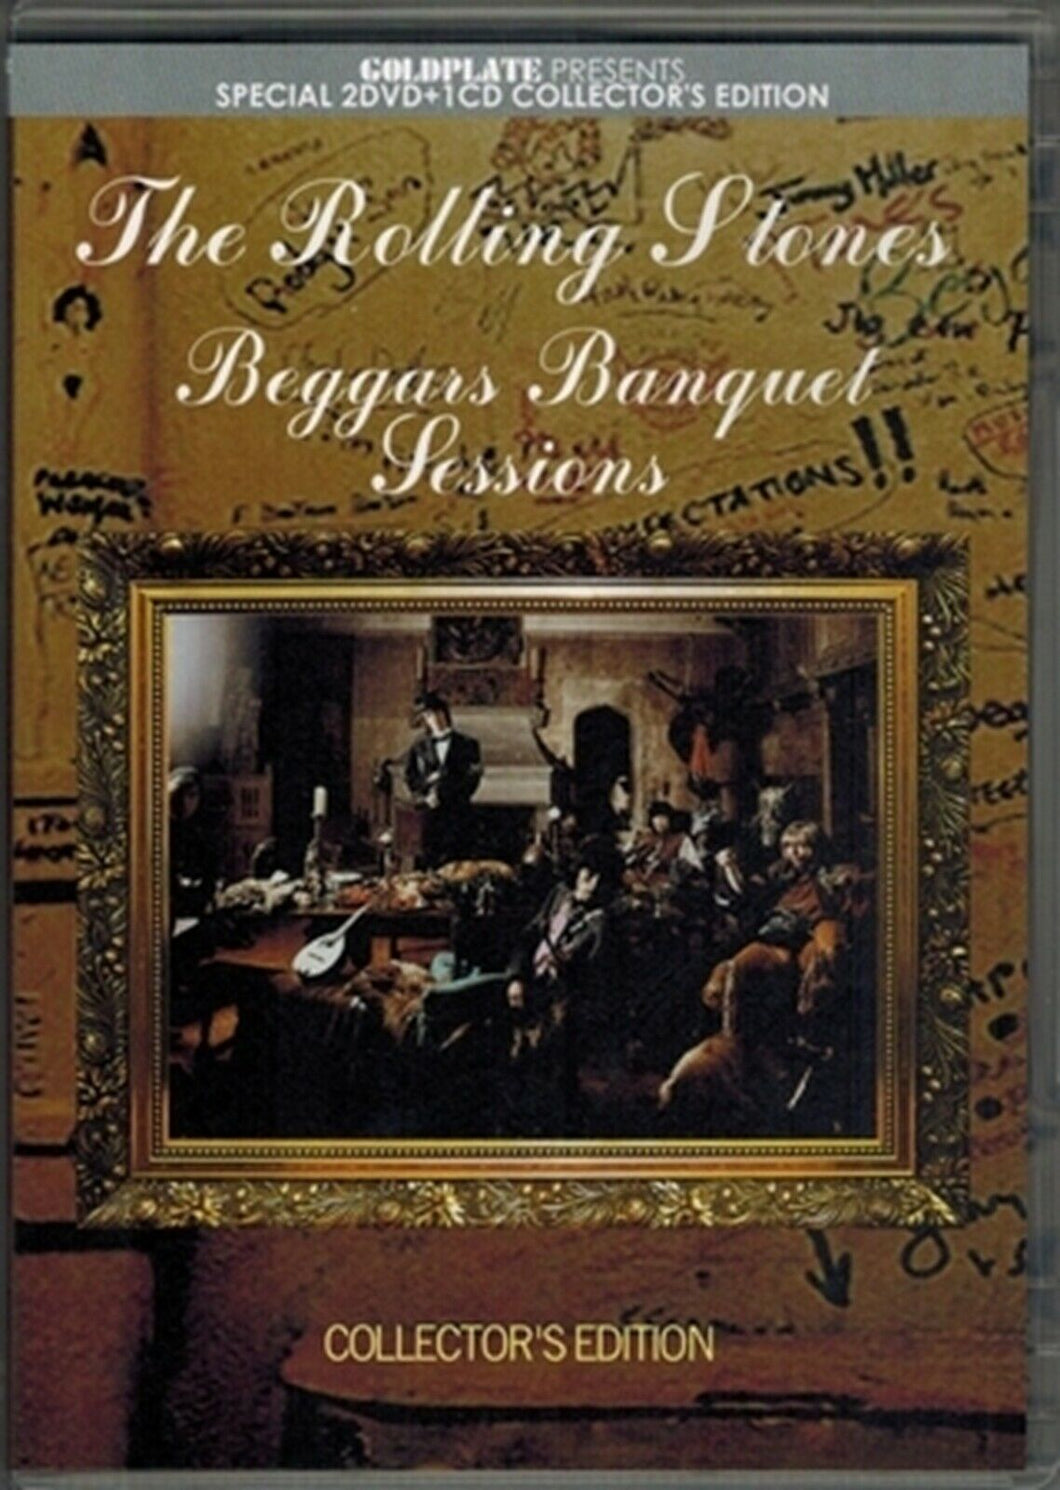 The Rolling Stones Beggars Banquet Sessions Goldplate 1CD 2DVD Set Music Rock